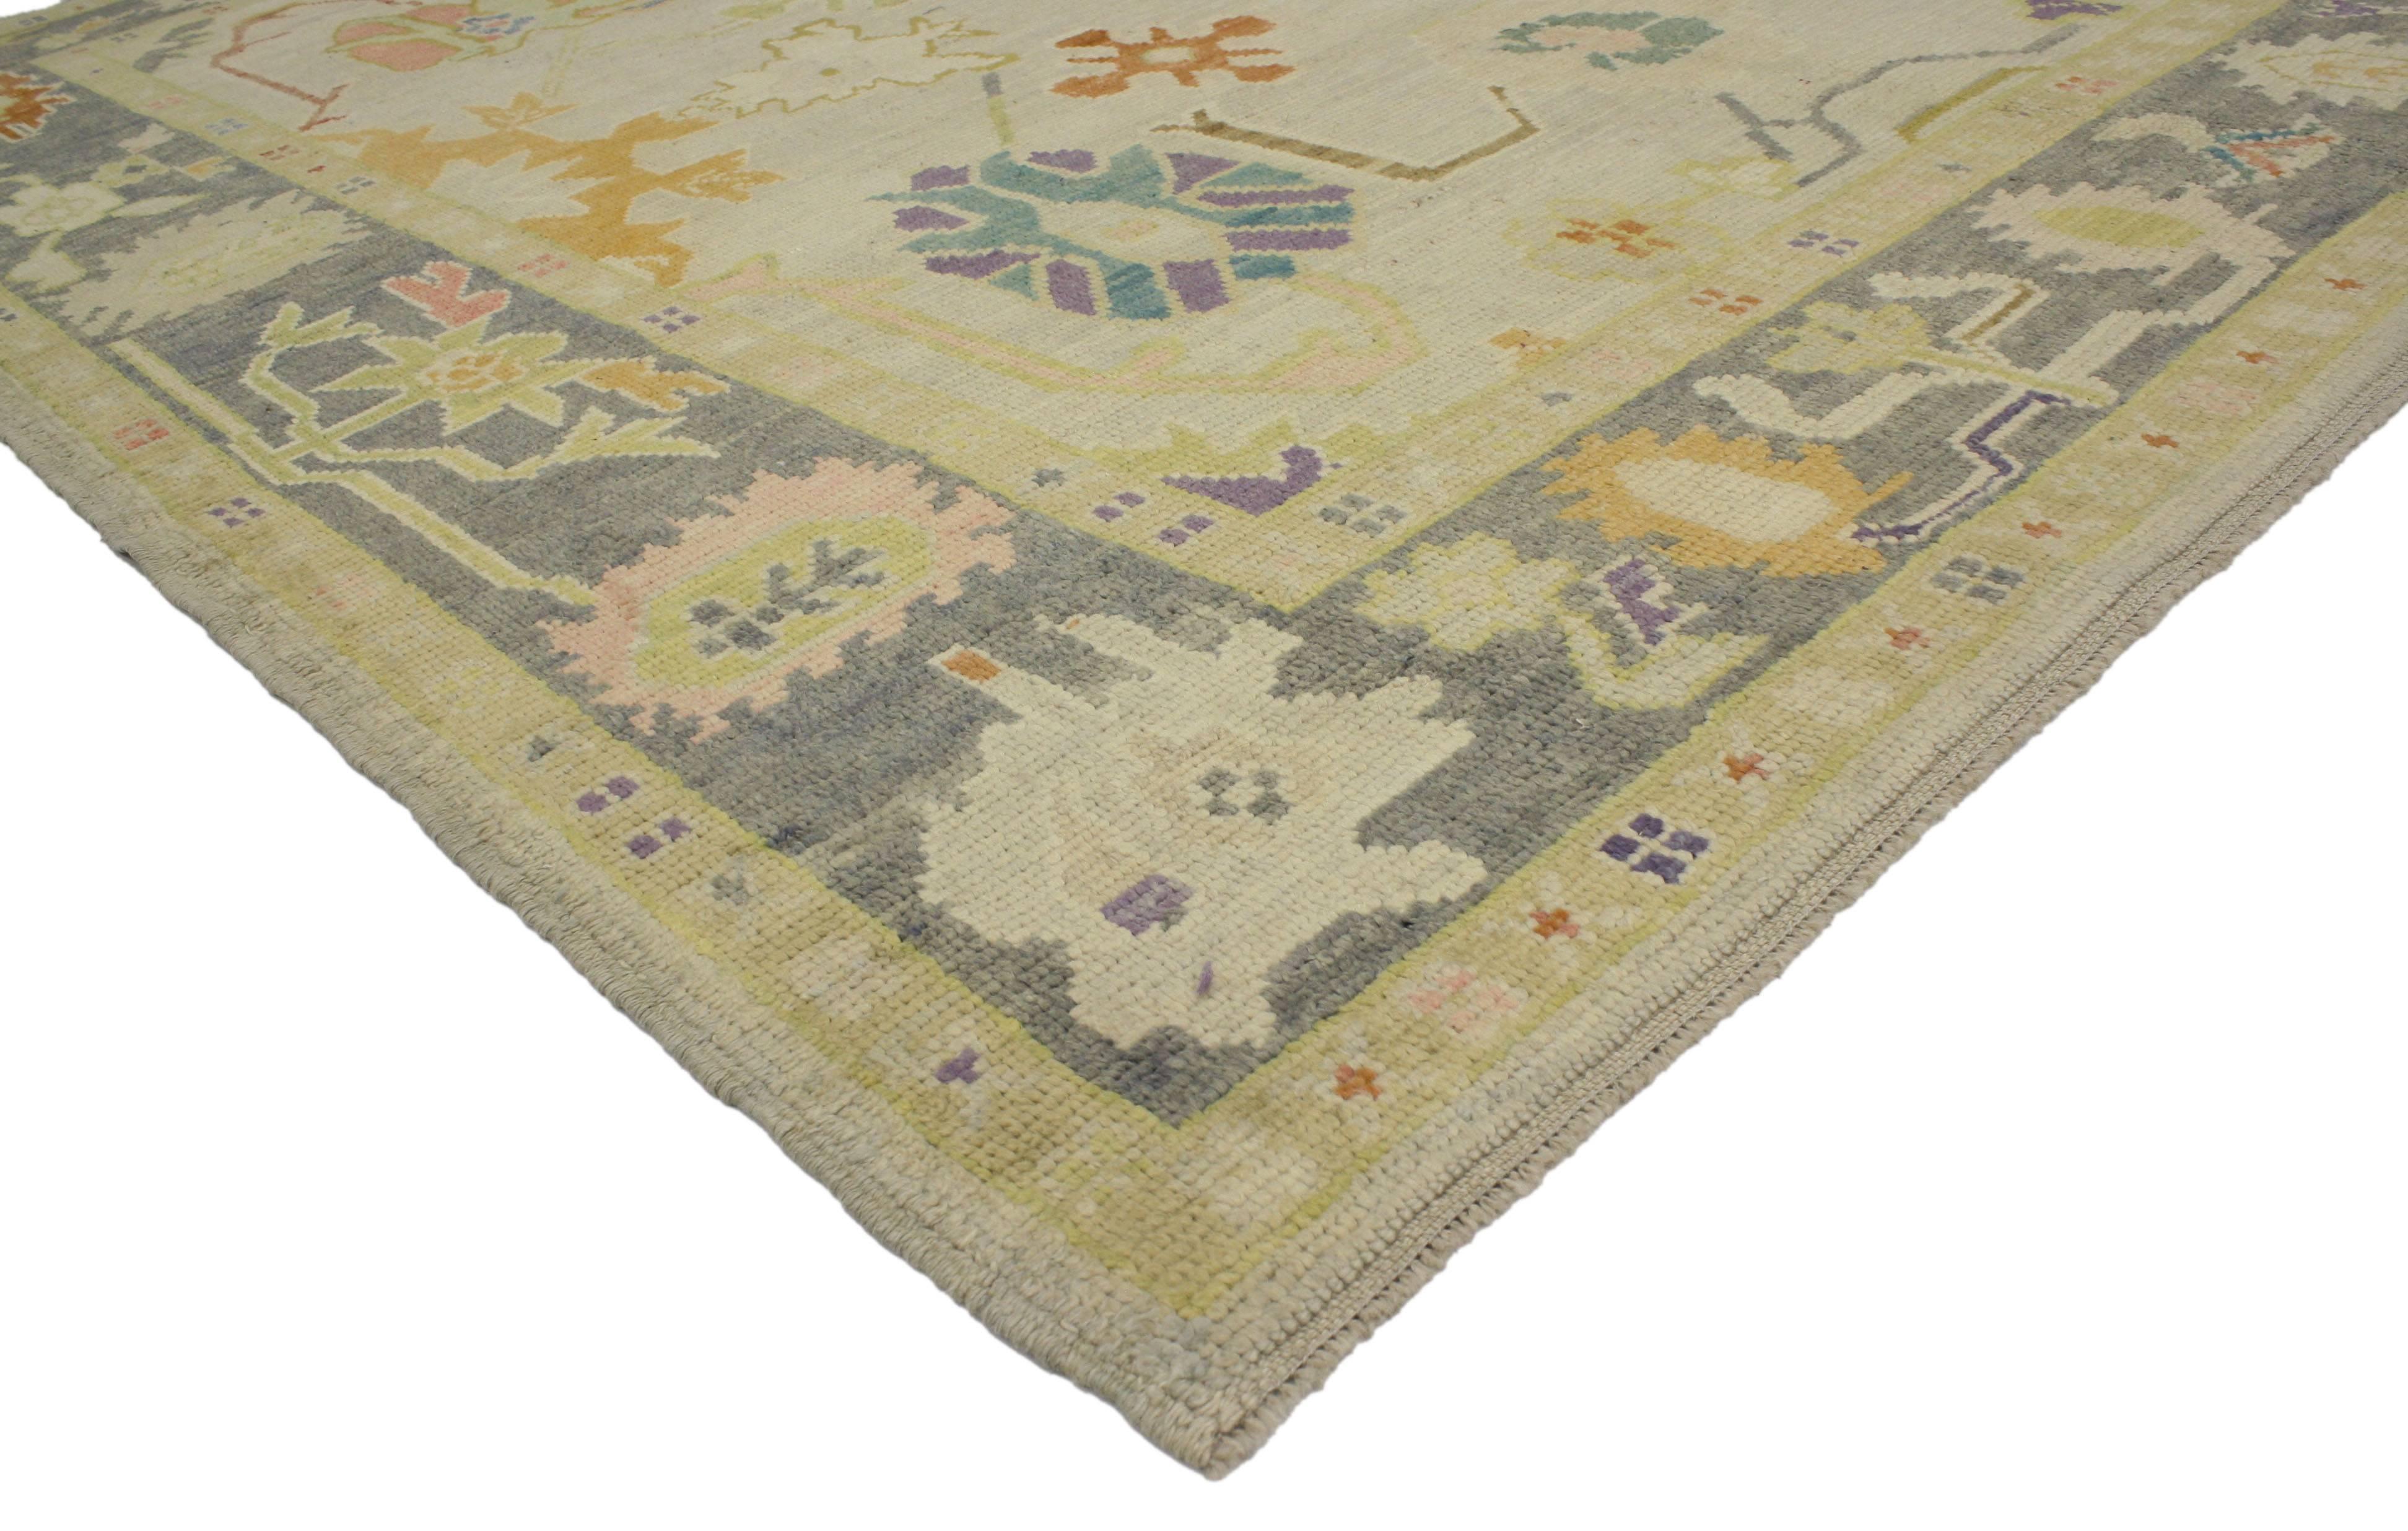 Highly stylish yet tastefully casual, this contemporary Turkish Oushak rug with pastel colors and tribal boho chic style is ideal for nearly any fashion-forward home. This timeless Oushak design has been given a twist to effortlessly accompany